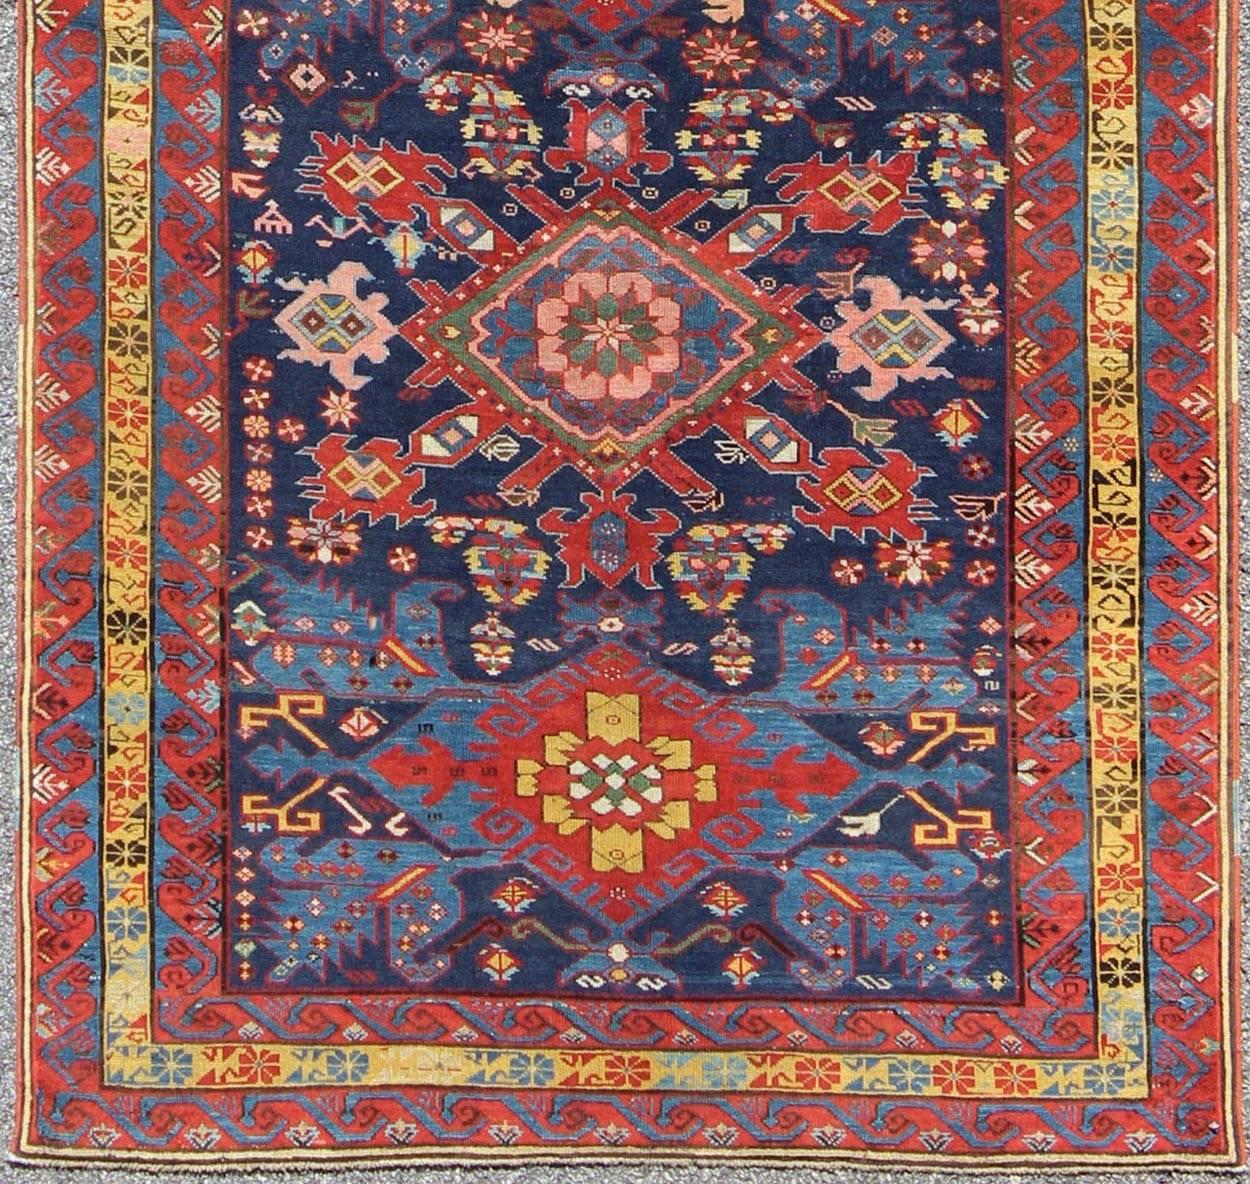 This elegant 19th Century Seychour rug originates from the mountainous region of the Caucuses. A beautiful row of five diamond-shaped medallions run the entire length of the rug, which incorporates various rich hues of blues, reds and